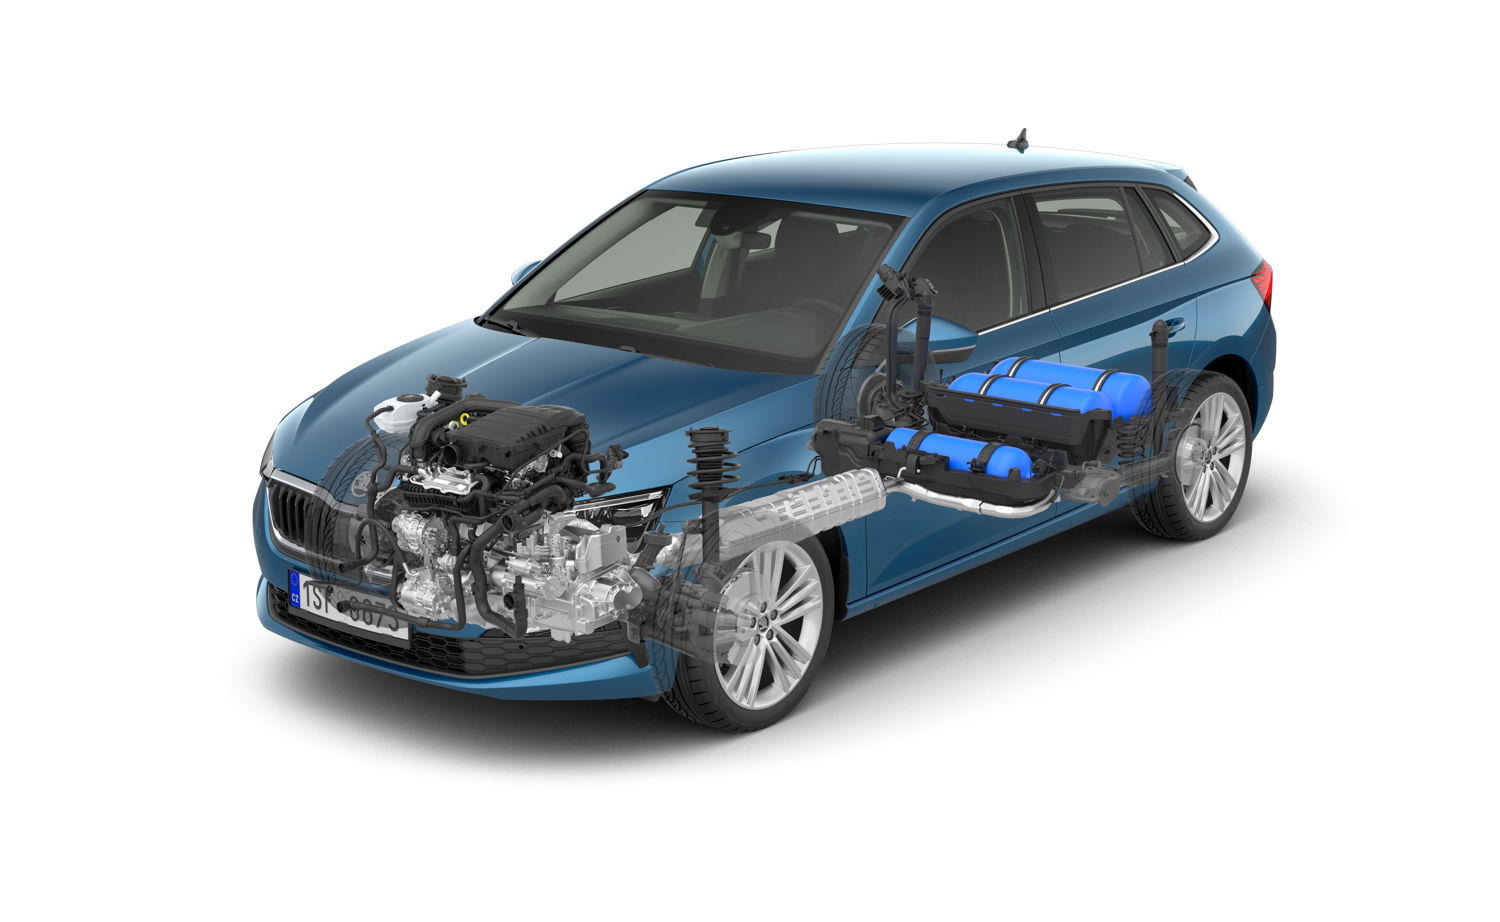 Vehicles like the all-new ŠKODA OCTAVIA G-TEC and
the already available G-TEC versions of the ŠKODA
SCALA (pictured) and KAMIQ enable immediate CO2
savings of 25 per cent, depending on the composition
and the production method of the gas used.